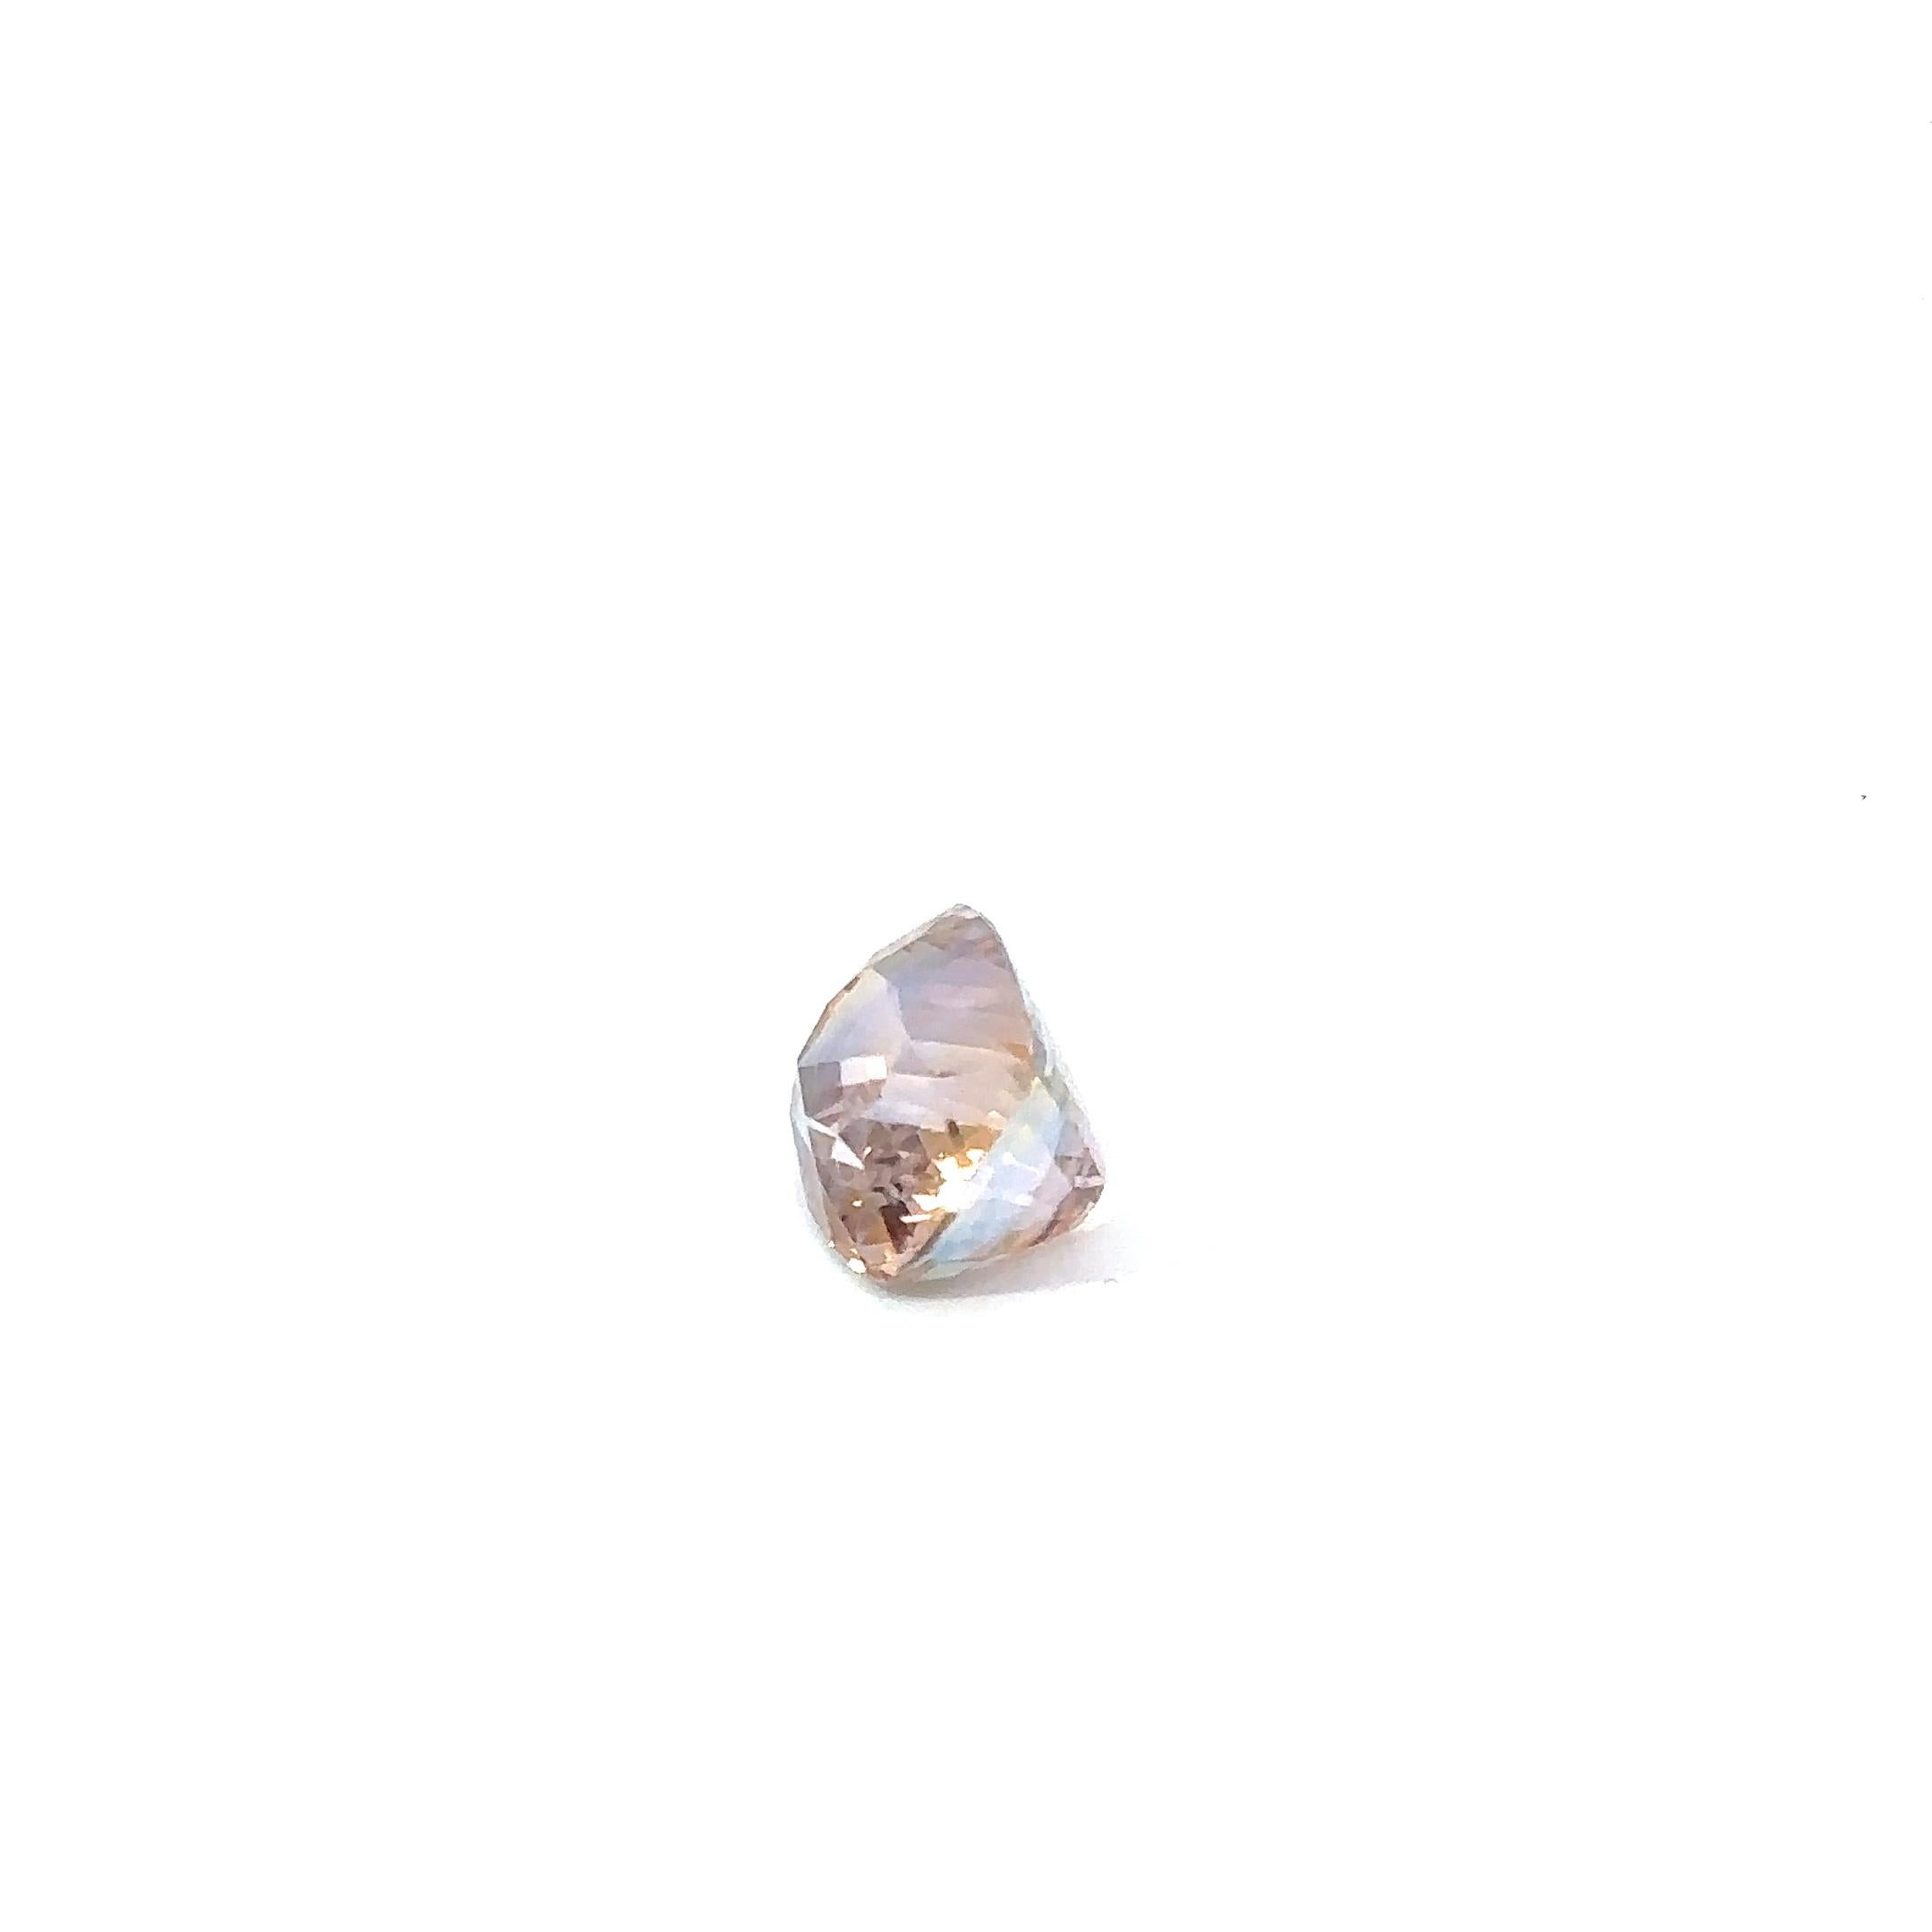 Cushion Cut GIA Certified 6.16 Carat Heated Sapphire ( Orangy Yellow) For Sale